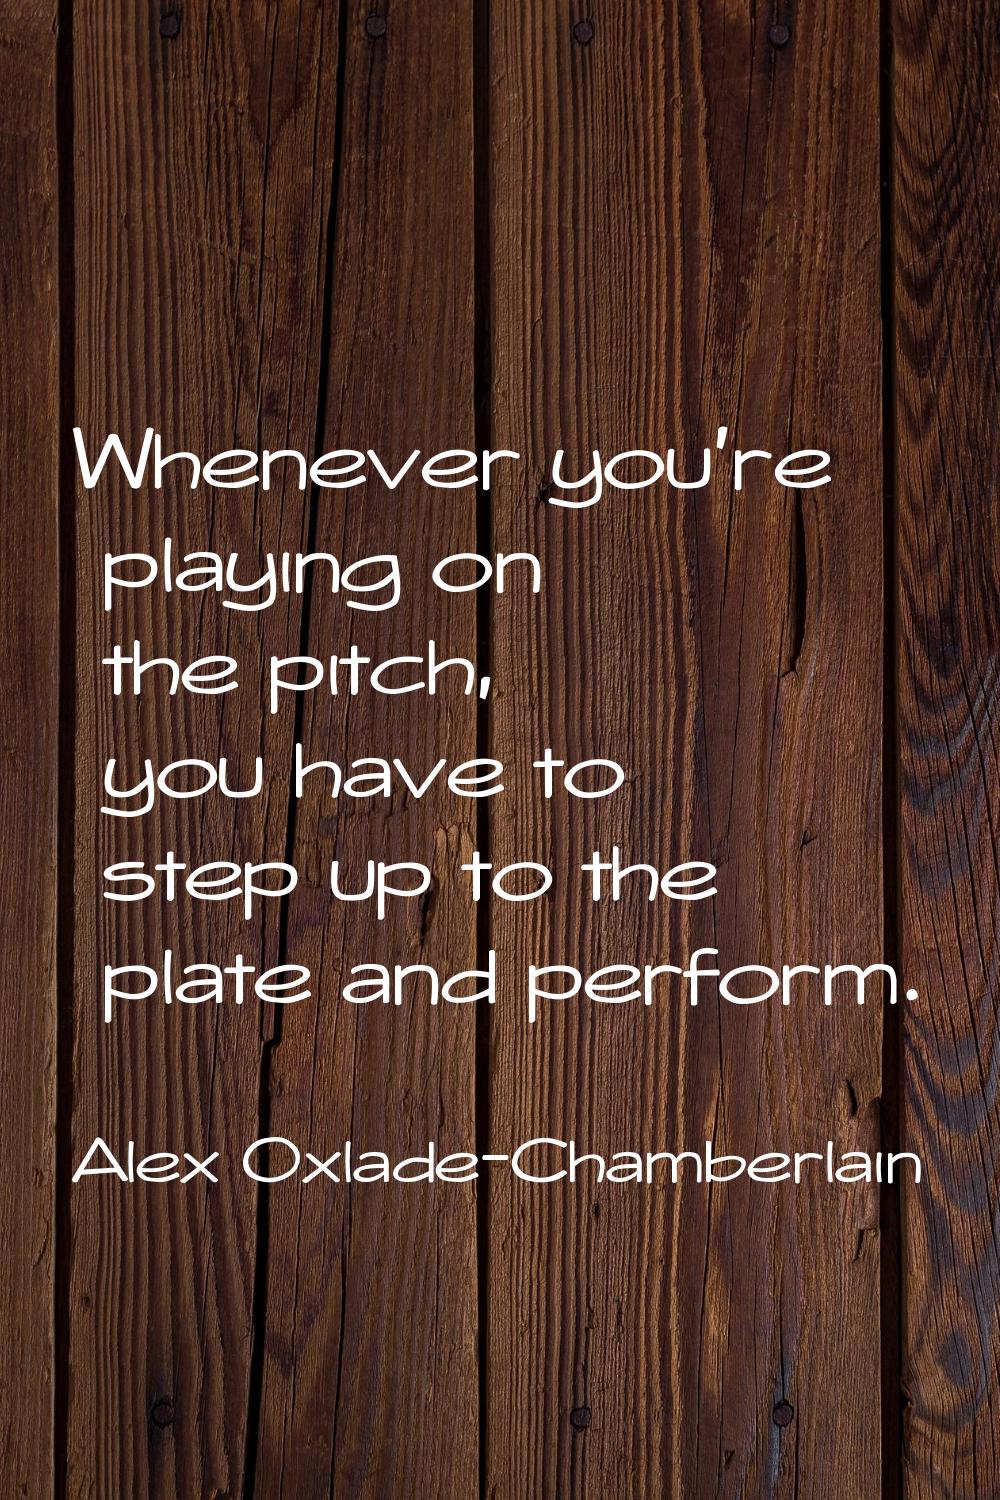 Whenever you're playing on the pitch, you have to step up to the plate and perform.